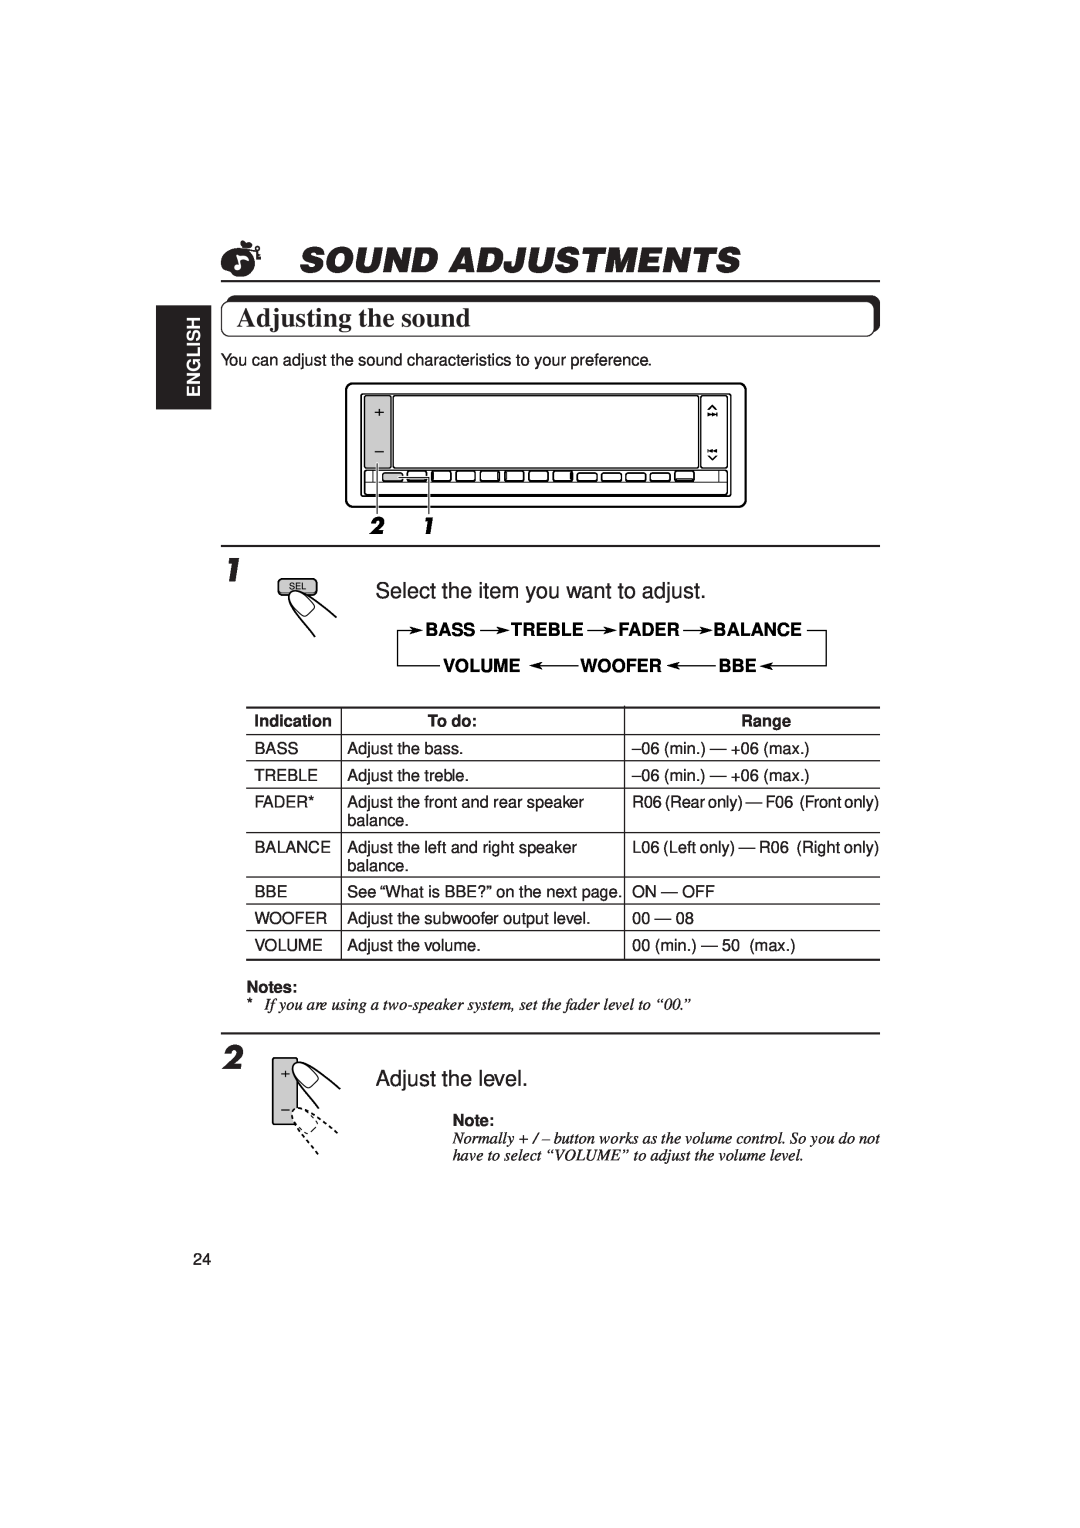 JVC KD-LX3R Sound Adjustments, Adjusting the sound, Select the item you want to adjust, Adjust the level, English, Bass 